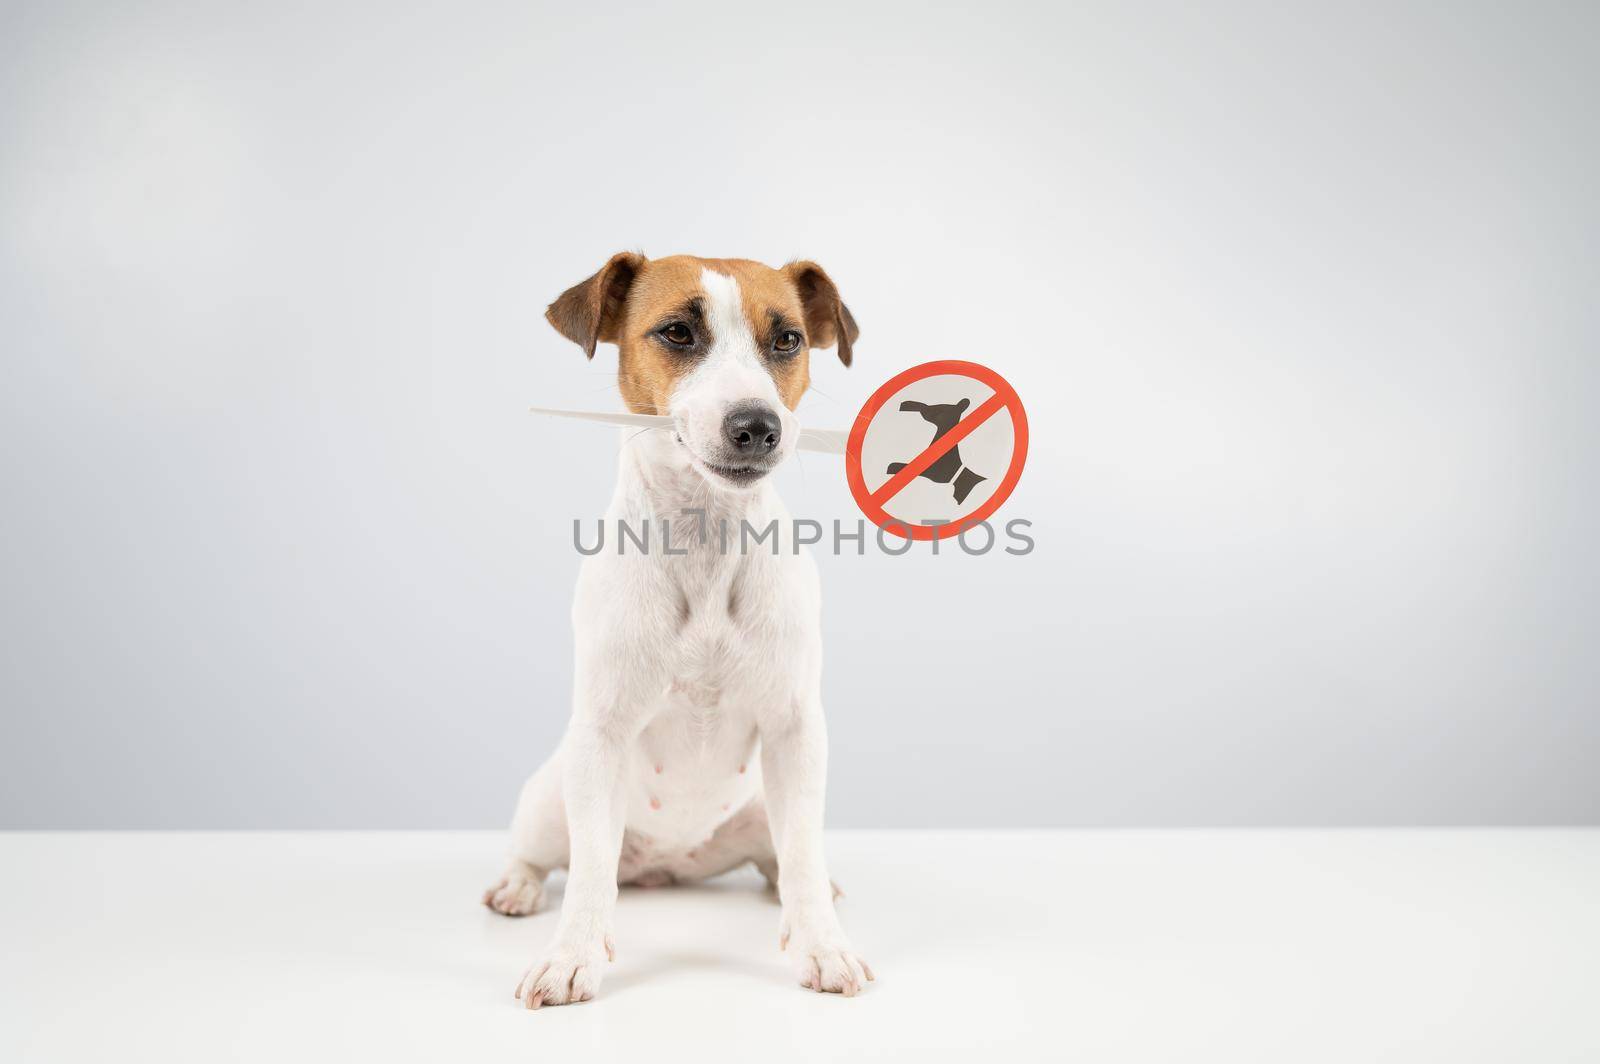 Dog jack russell terrier holding a sign dogs are not allowed on a white background